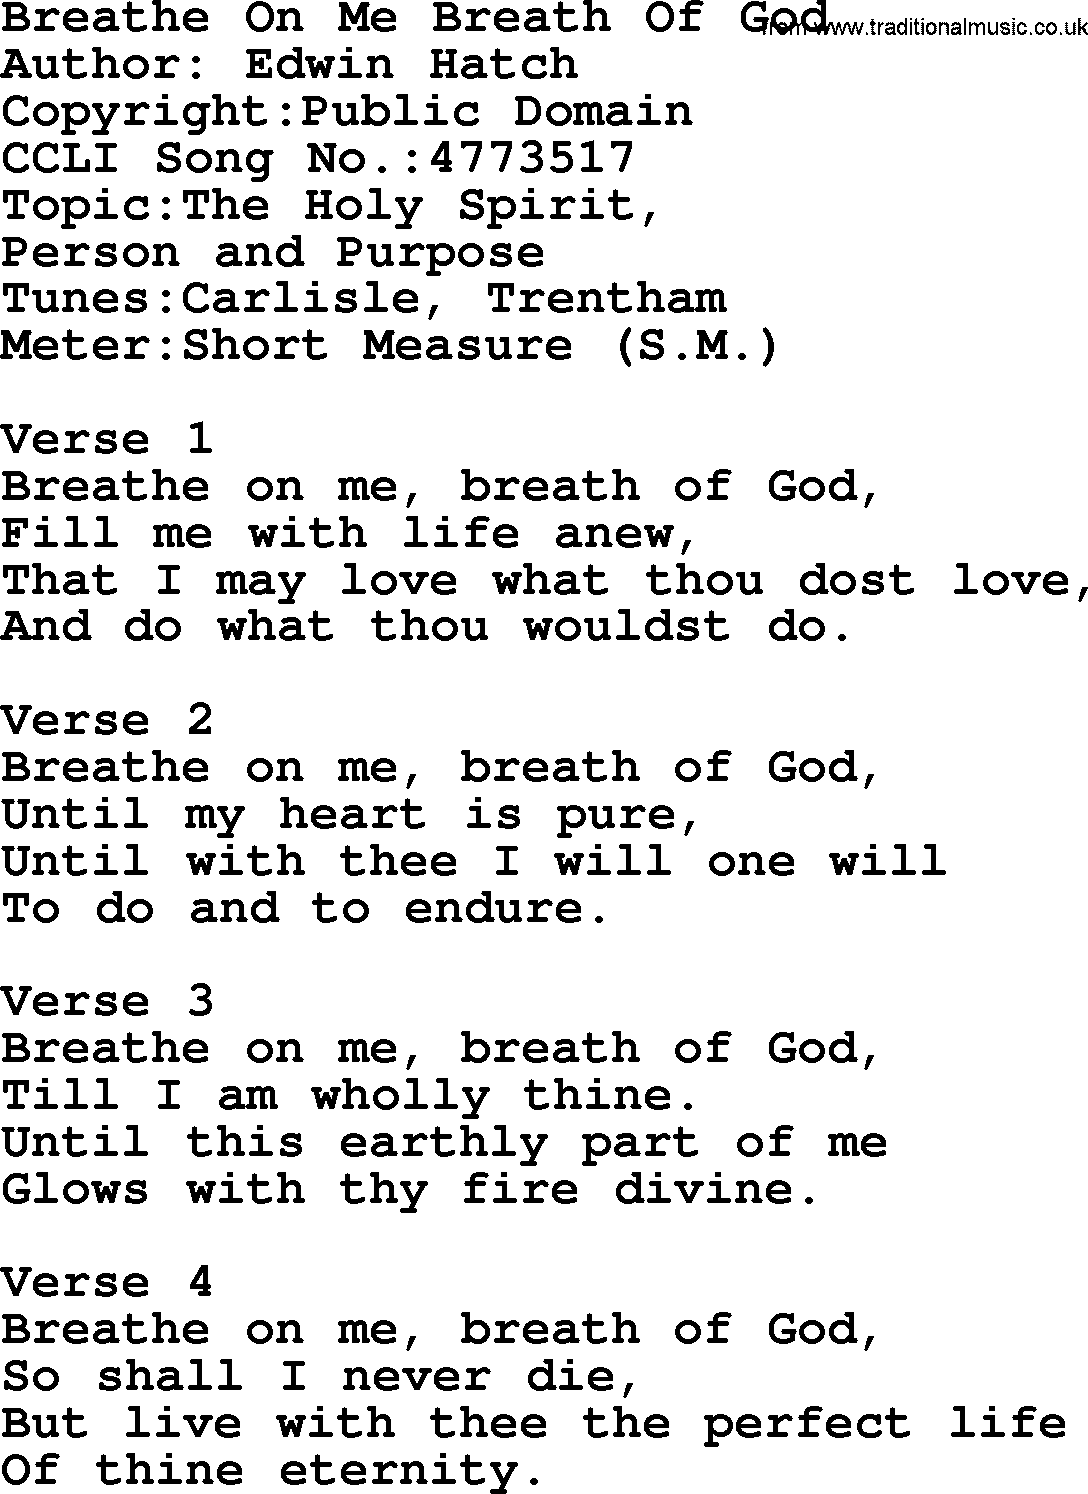 A collection of 500+ most sung Christian church hymns and songs, title: Breathe On Me Breath Of God, lyrics, PPTX and PDF